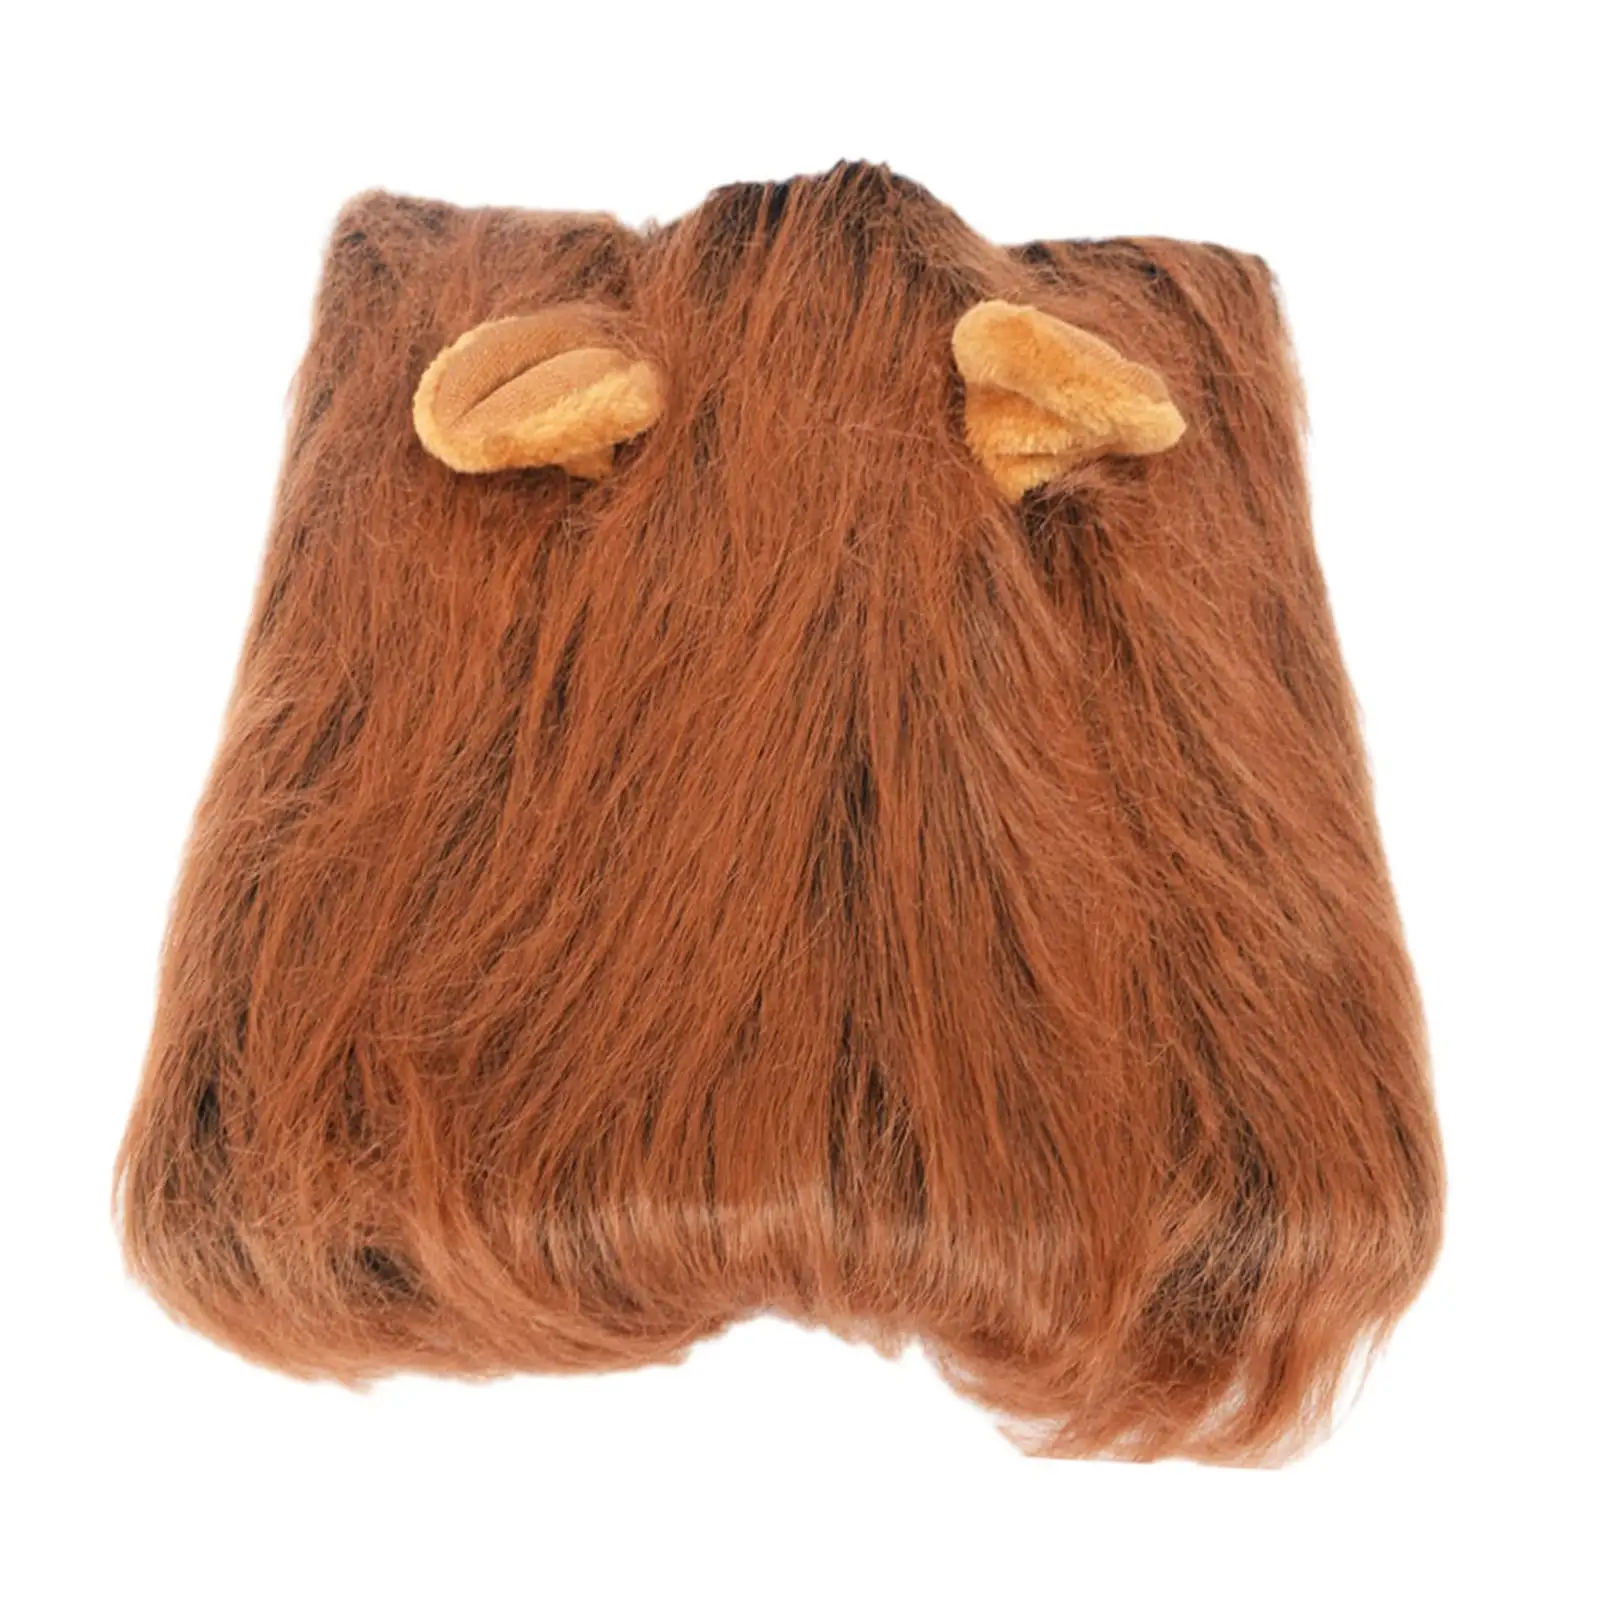 Mane for Cat Outfit Fashion Halloween Costume for Role Play Dogs Party